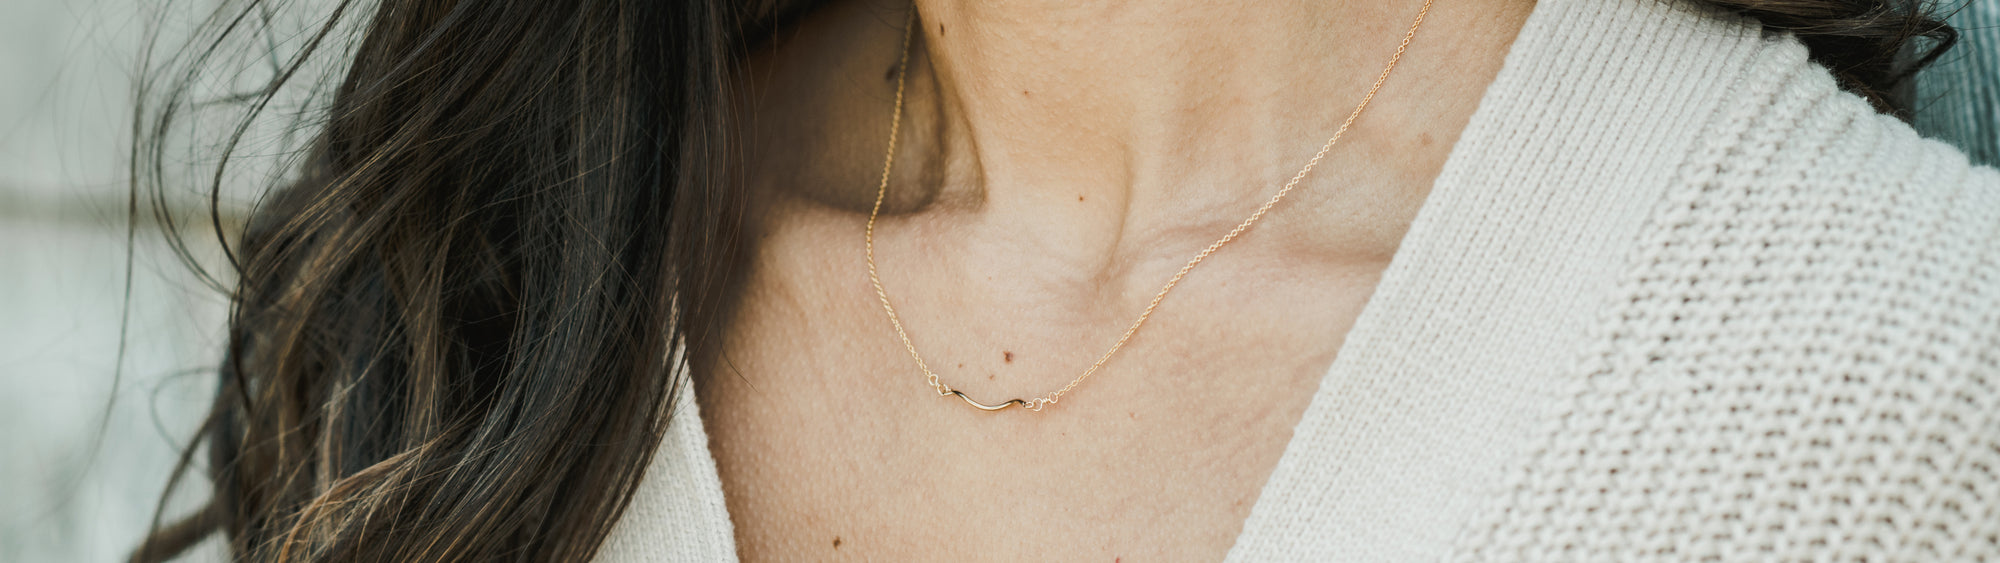 Close-up of a woman's neck wearing a delicate gold necklace with a small pendant, contrasted against her white sweater and dark hair.